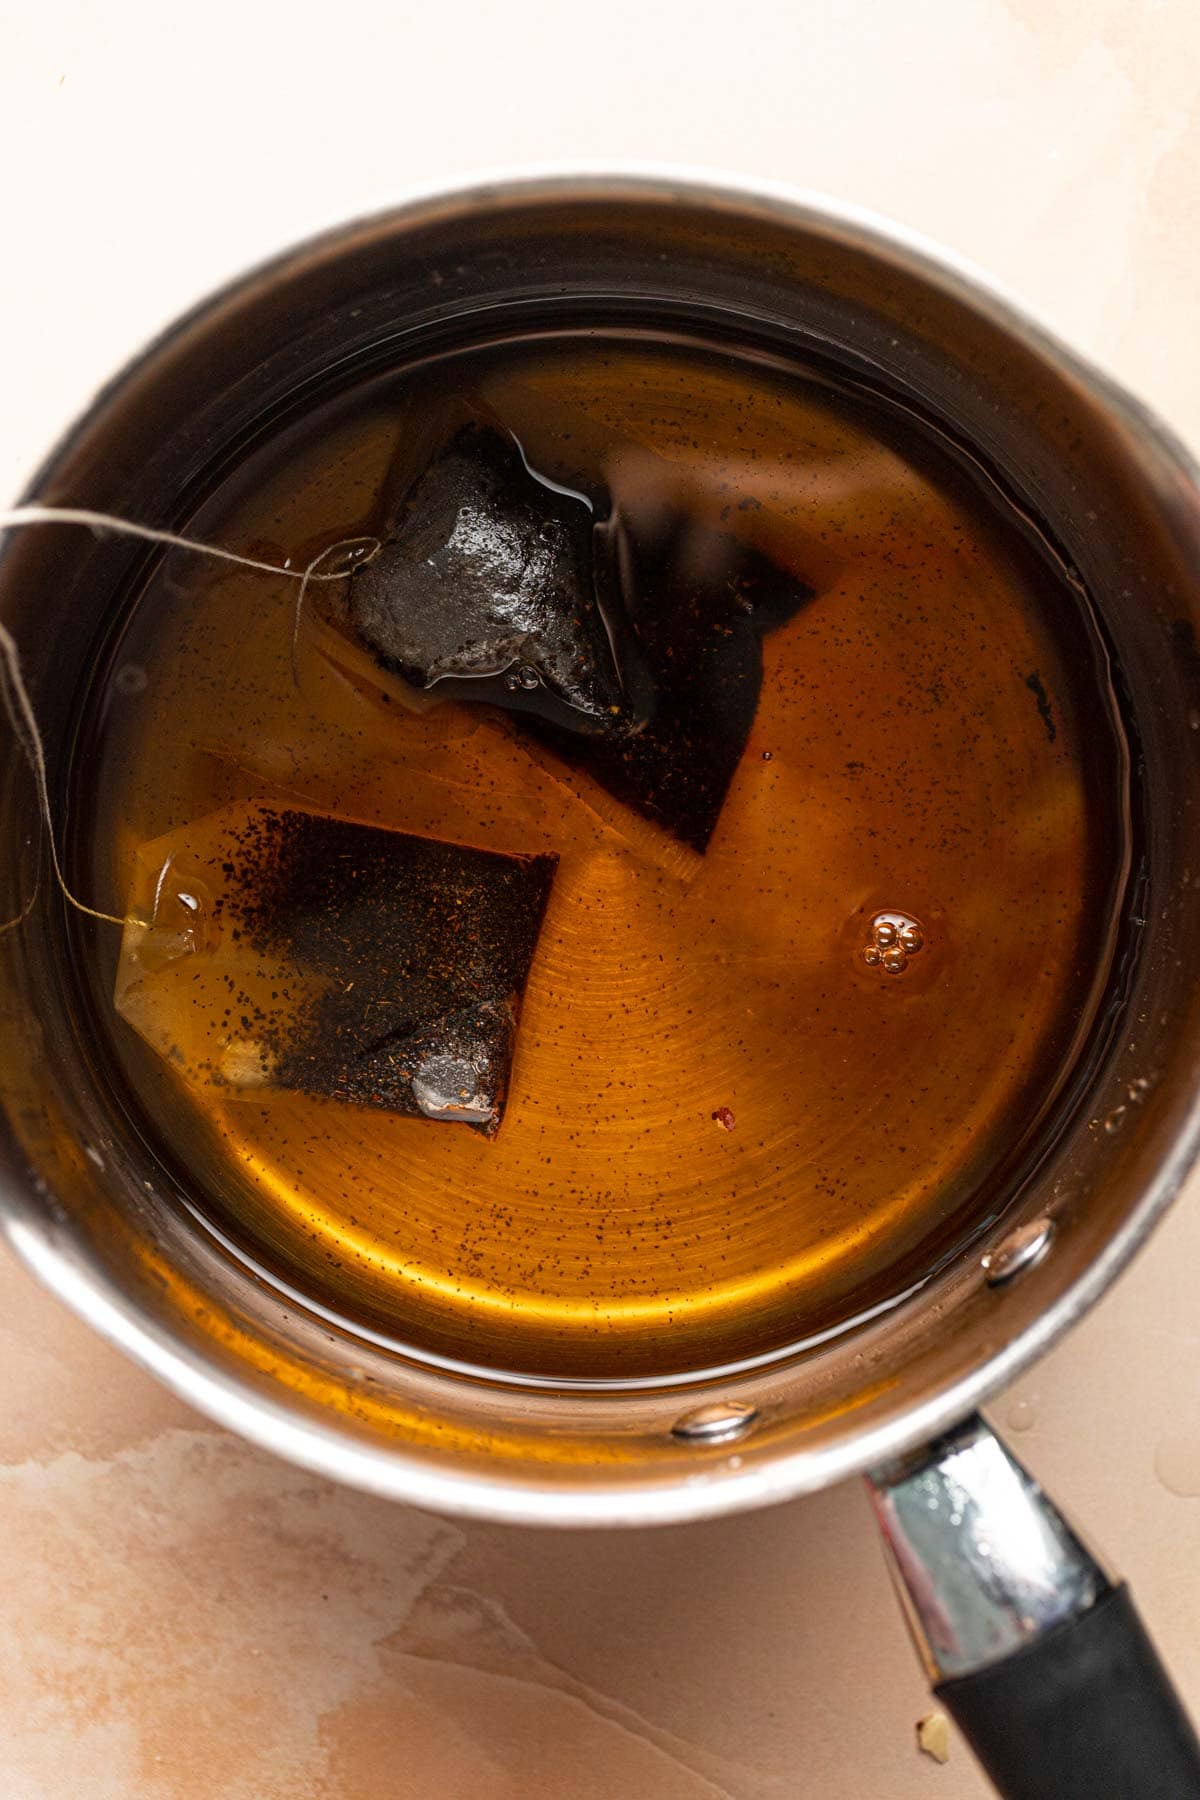 Two teabags steeping in water in a small saucepan.